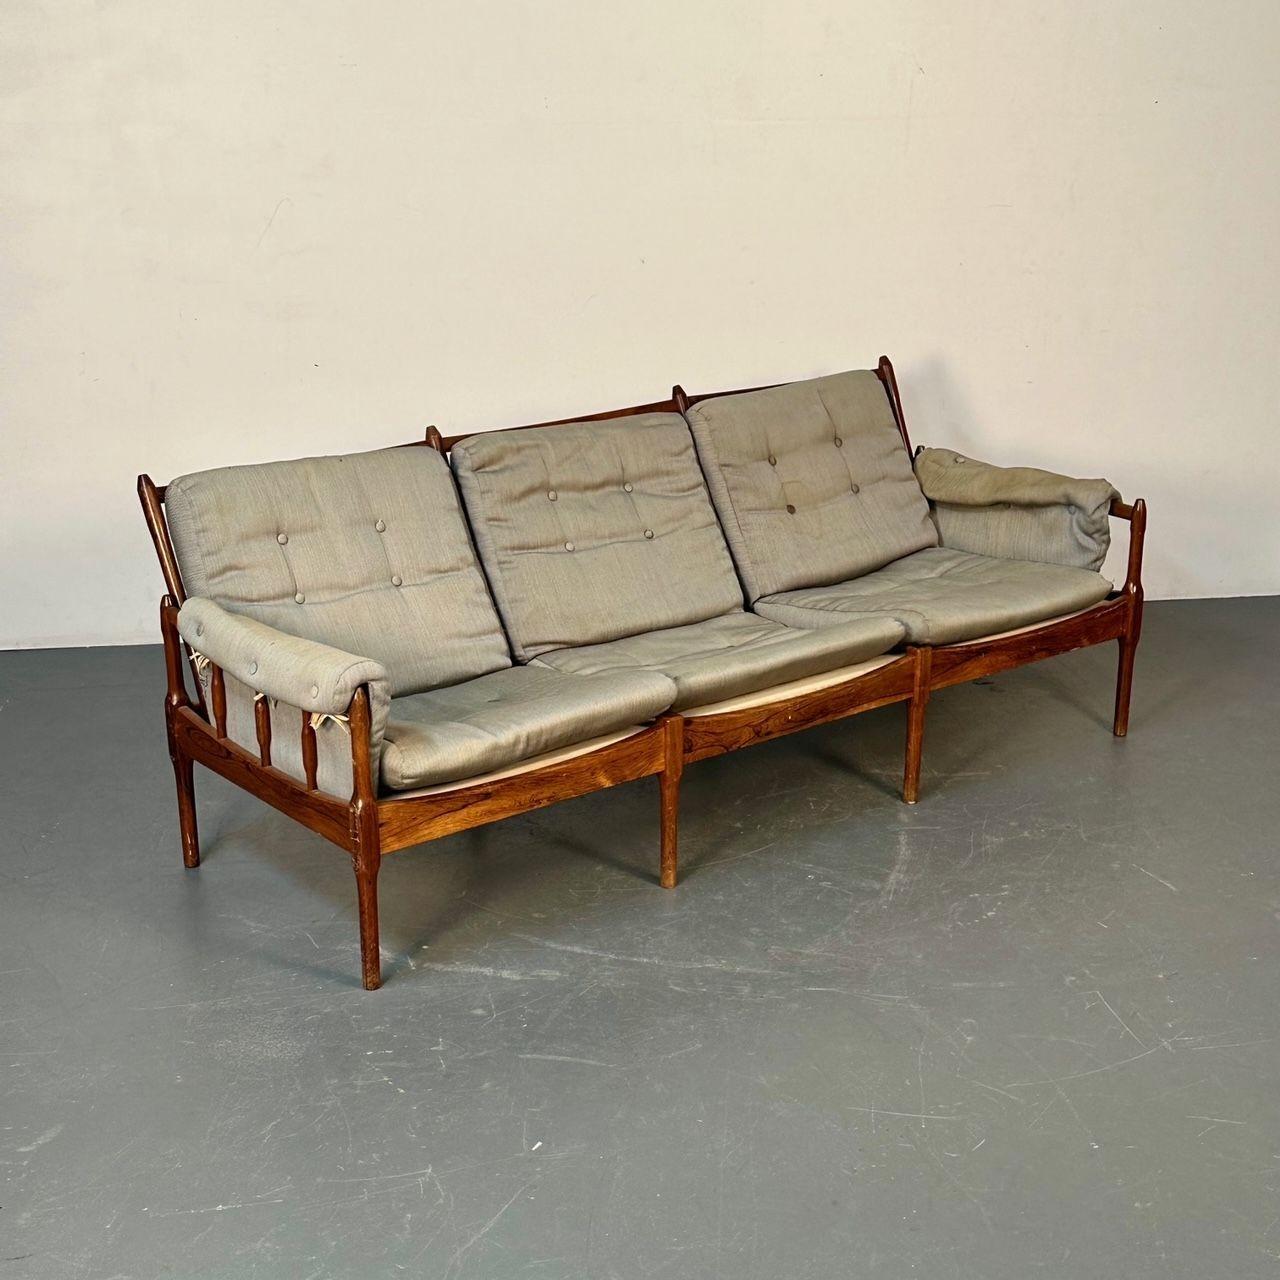 Danish Mid-Century Modern Rosewood Three Seater Sofa for Reupholstery

Mid-Century Modern sofa designed and produced in Denmark having turned rosewood spindles. Needs re-upholstery.

29 H x 78